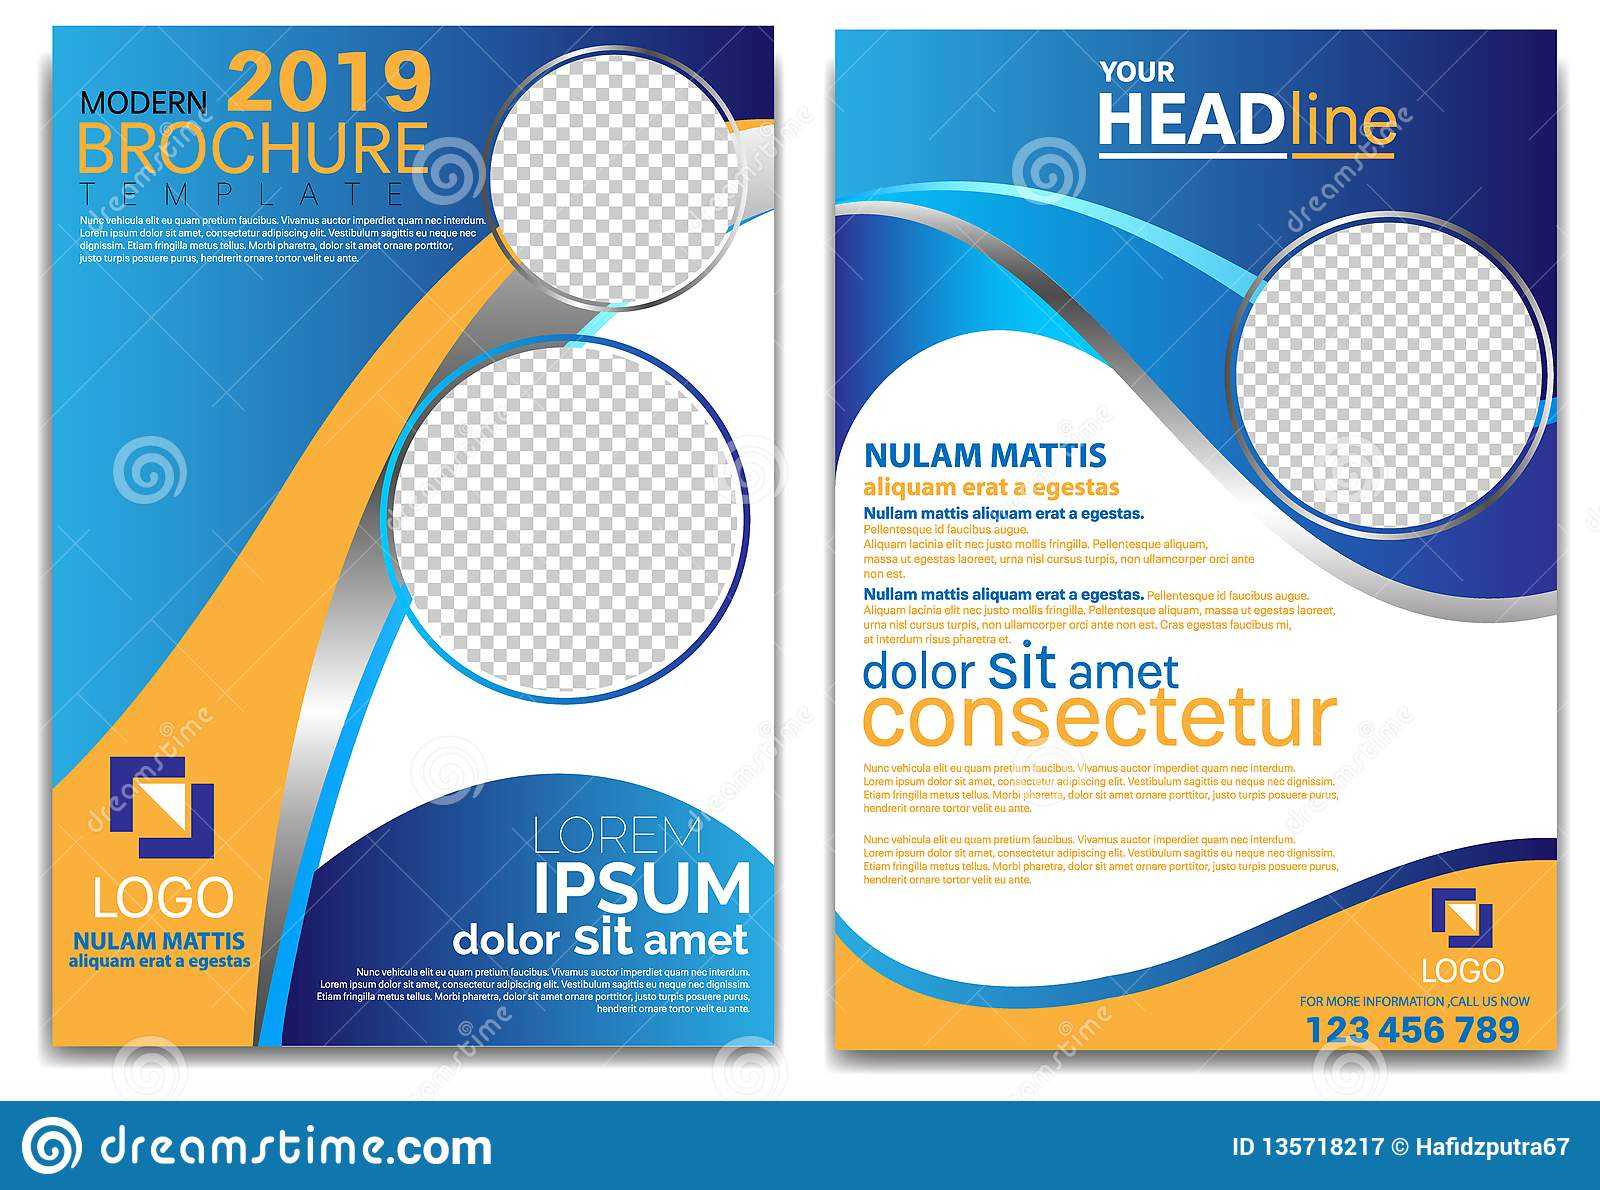 Modern Brochure Template 2019 And Professional Brochure Within Professional Brochure Design Templates